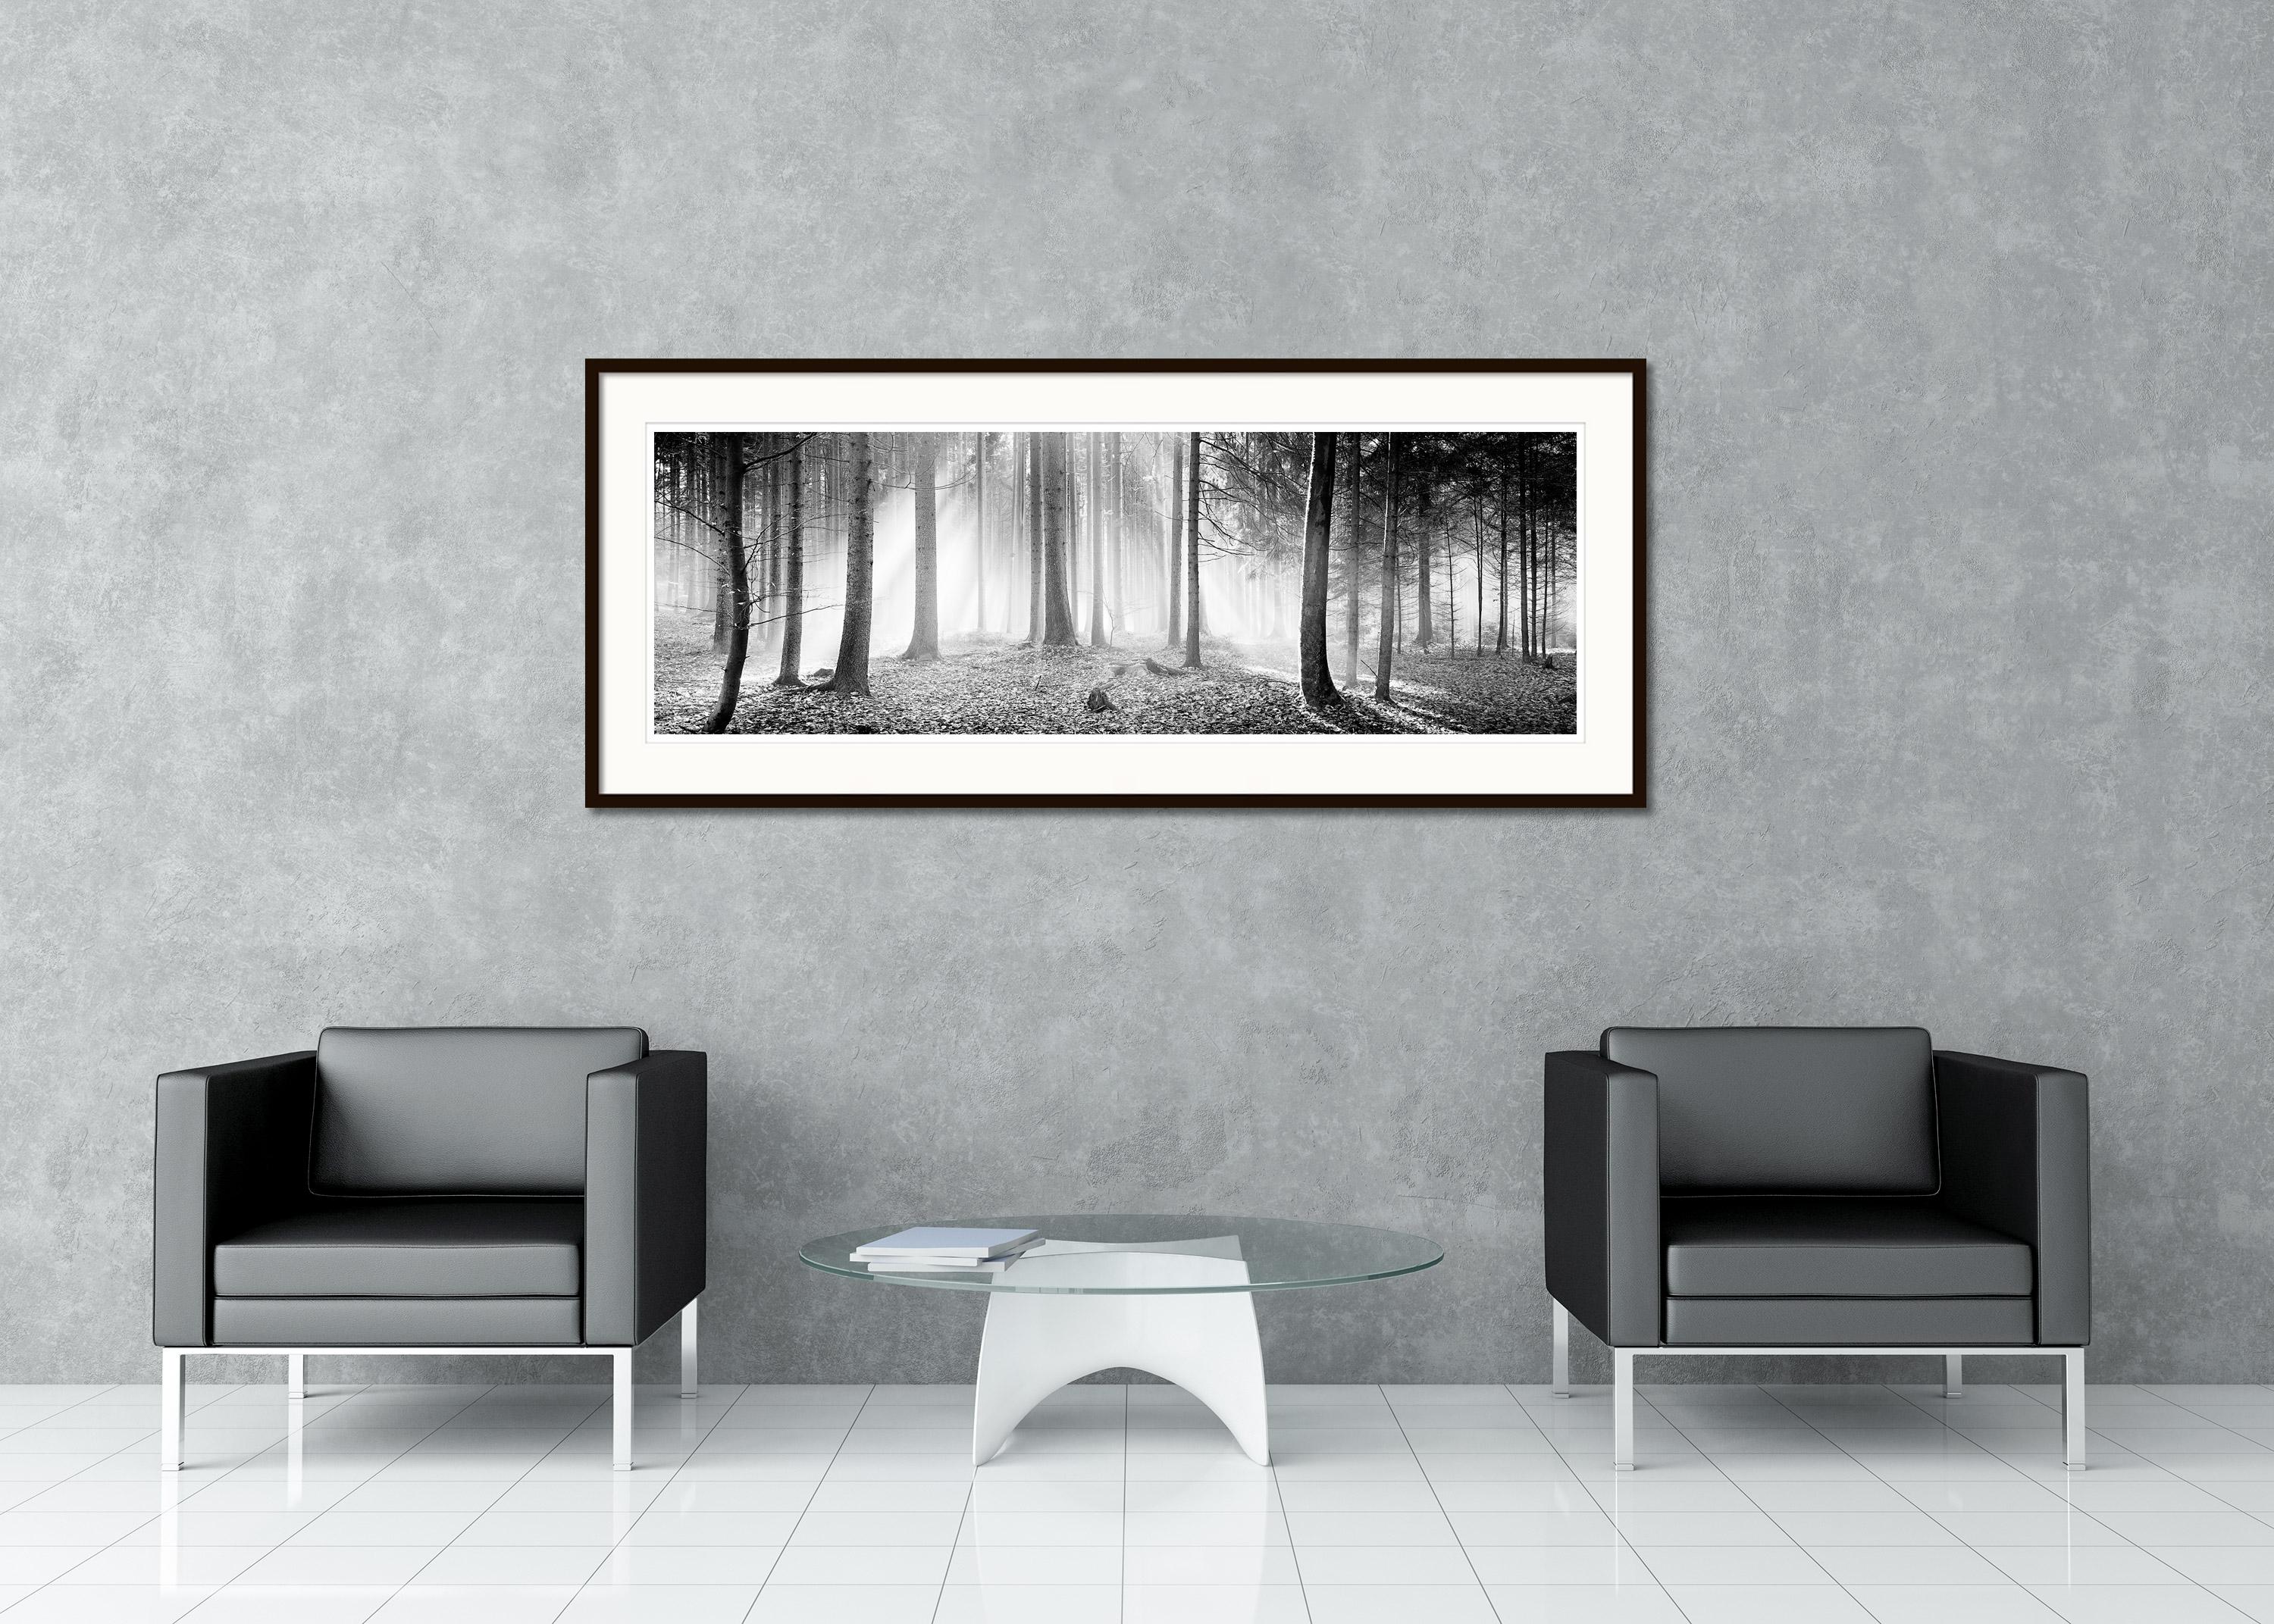 Black and white fine art panorama landscape photography. Archival pigment ink print, limited edition of 10. Trees in the forest in fog and rising sun, Austria.  
All Gerald Berghammer prints are made to order in limited editions on Hahnemuehle Photo